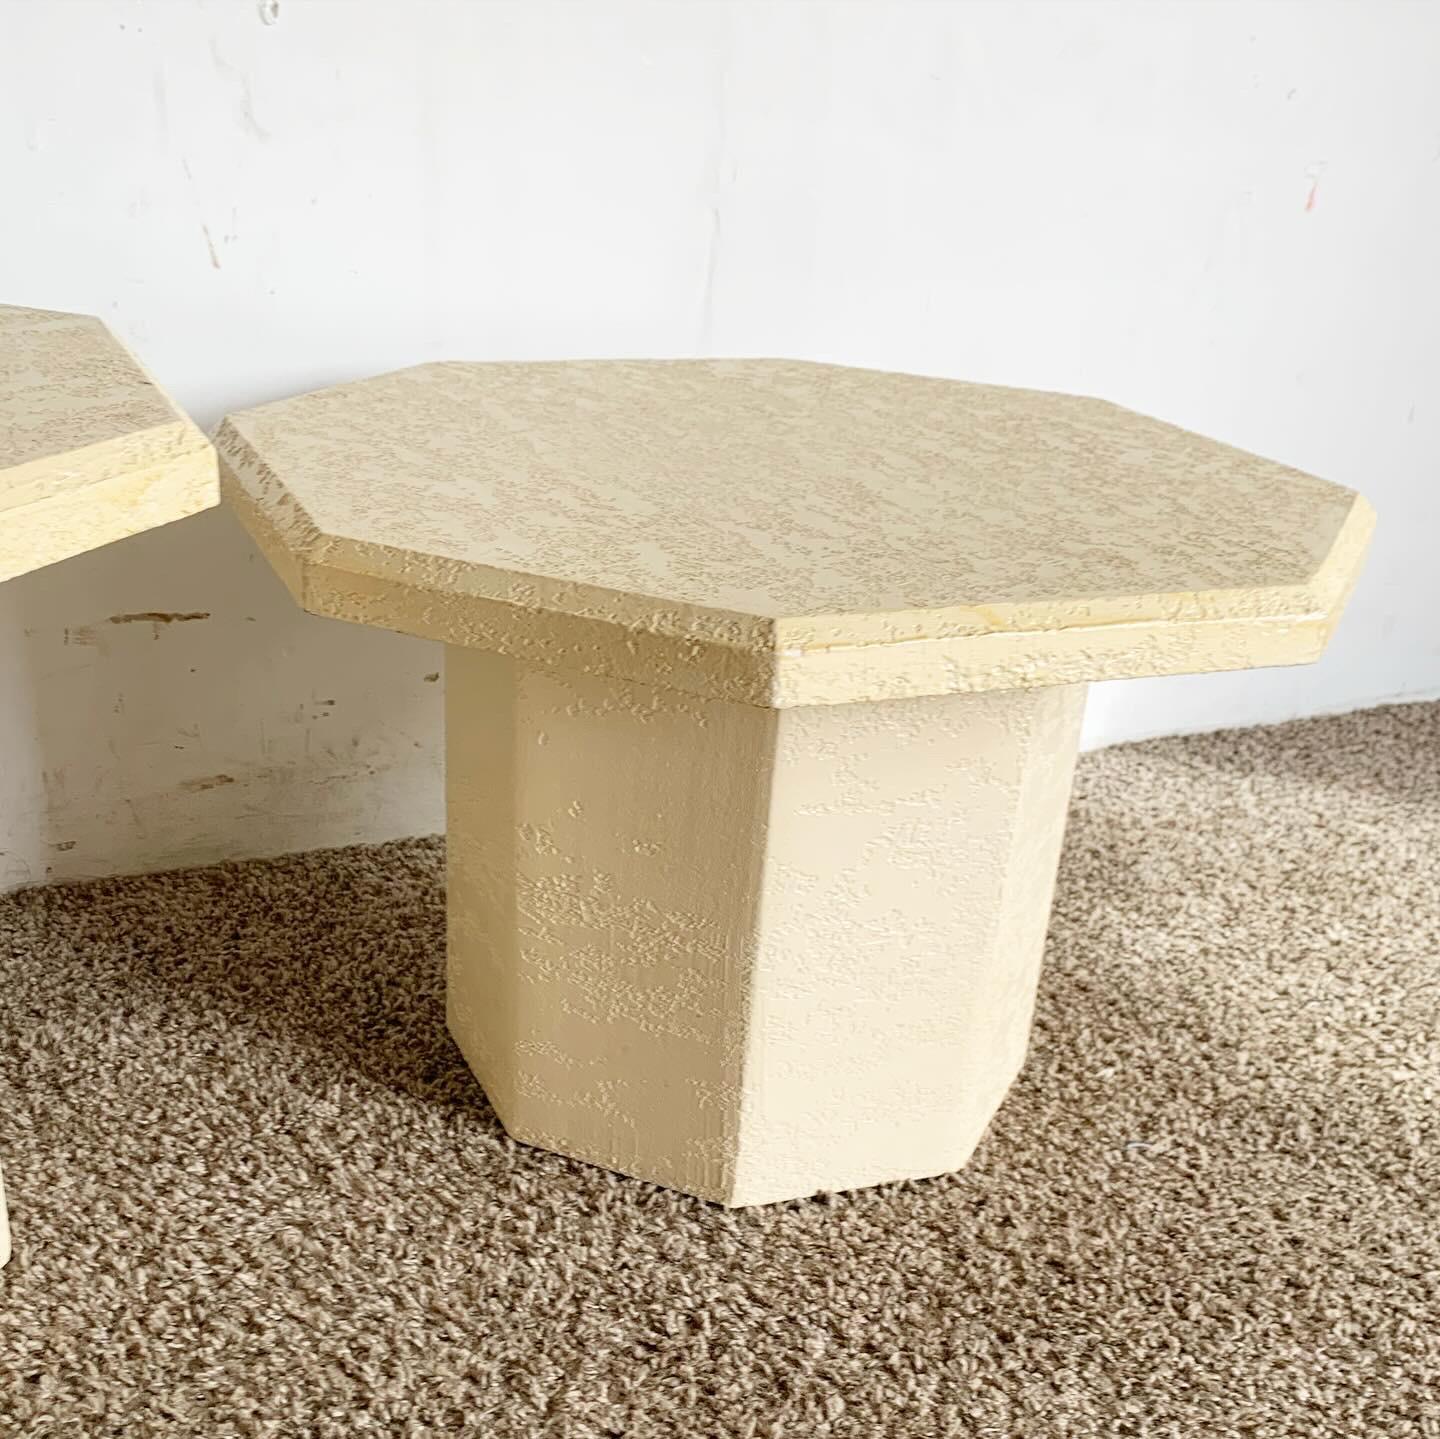 Postmodern Cream Octagonal Faux Stone Mushroom Nesting Tables - Set of 3 In Good Condition For Sale In Delray Beach, FL